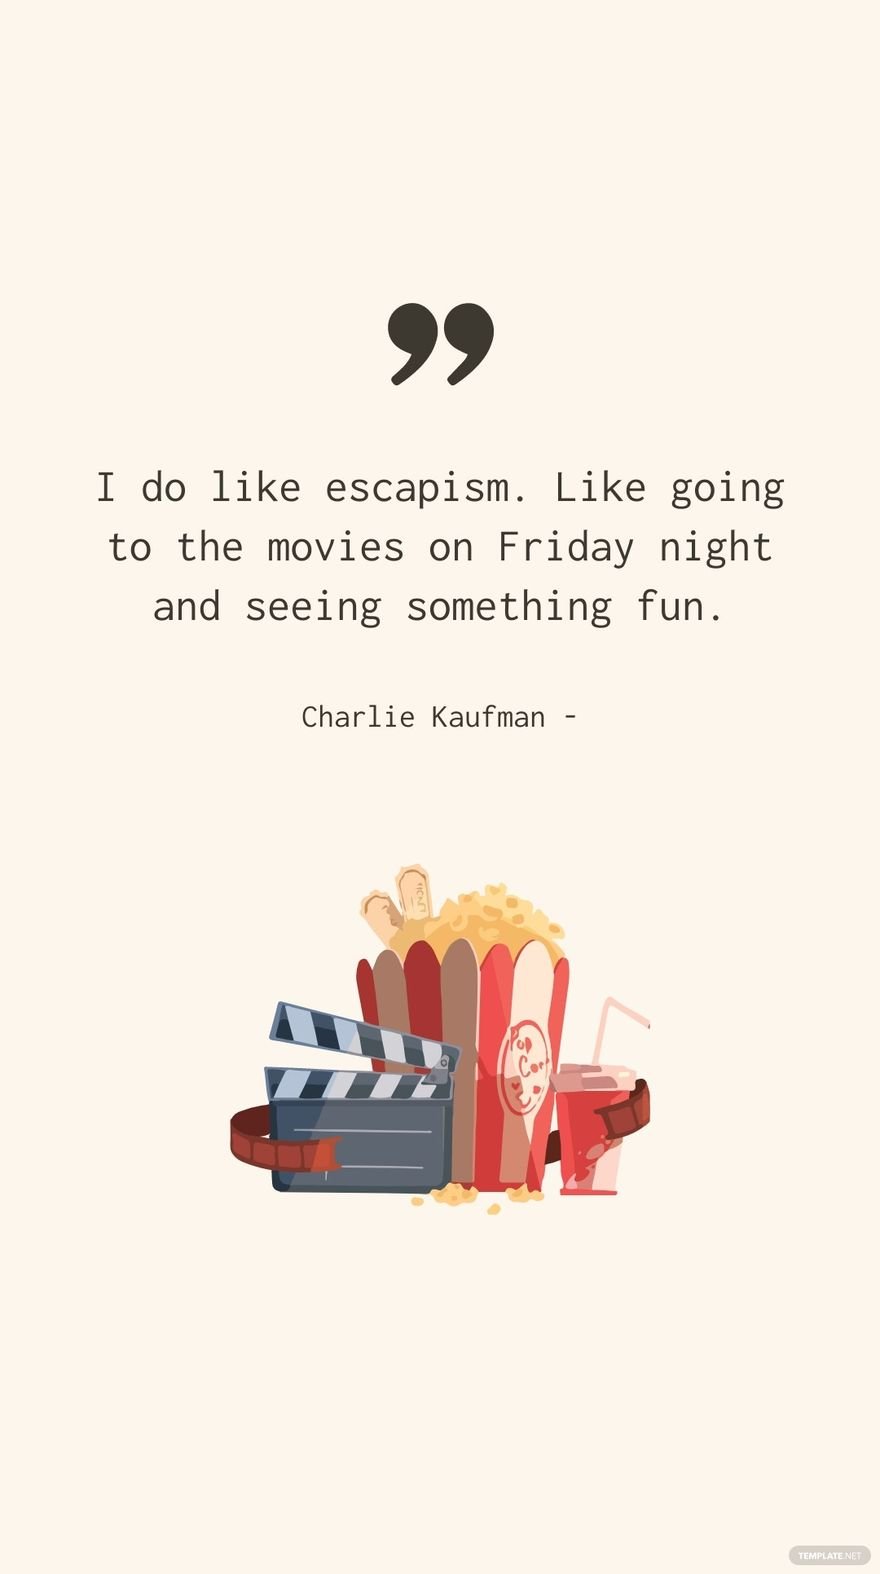 Free Charlie Kaufman - I do like escapism. Like going to the movies on Friday night and seeing something fun. in JPG